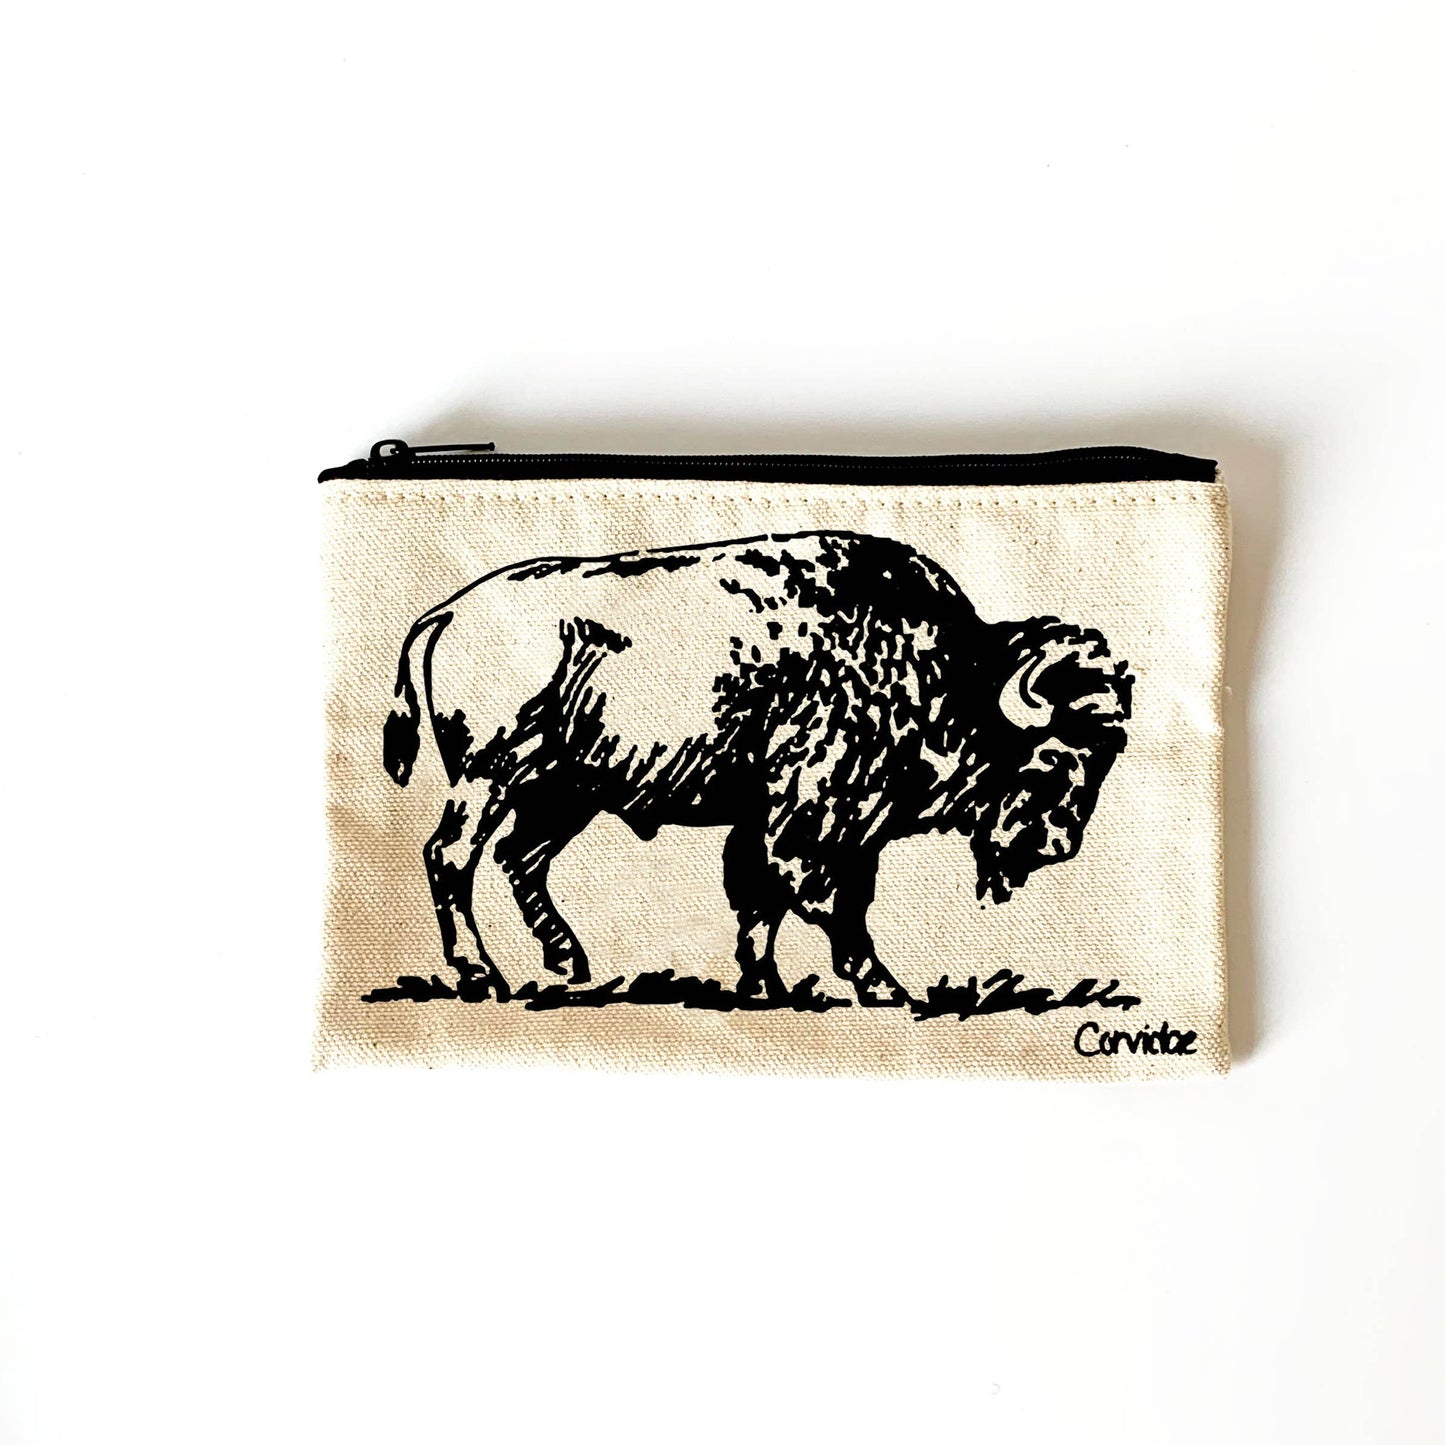 Corvidae drawings & designs - Bison Small Zipper Pouch